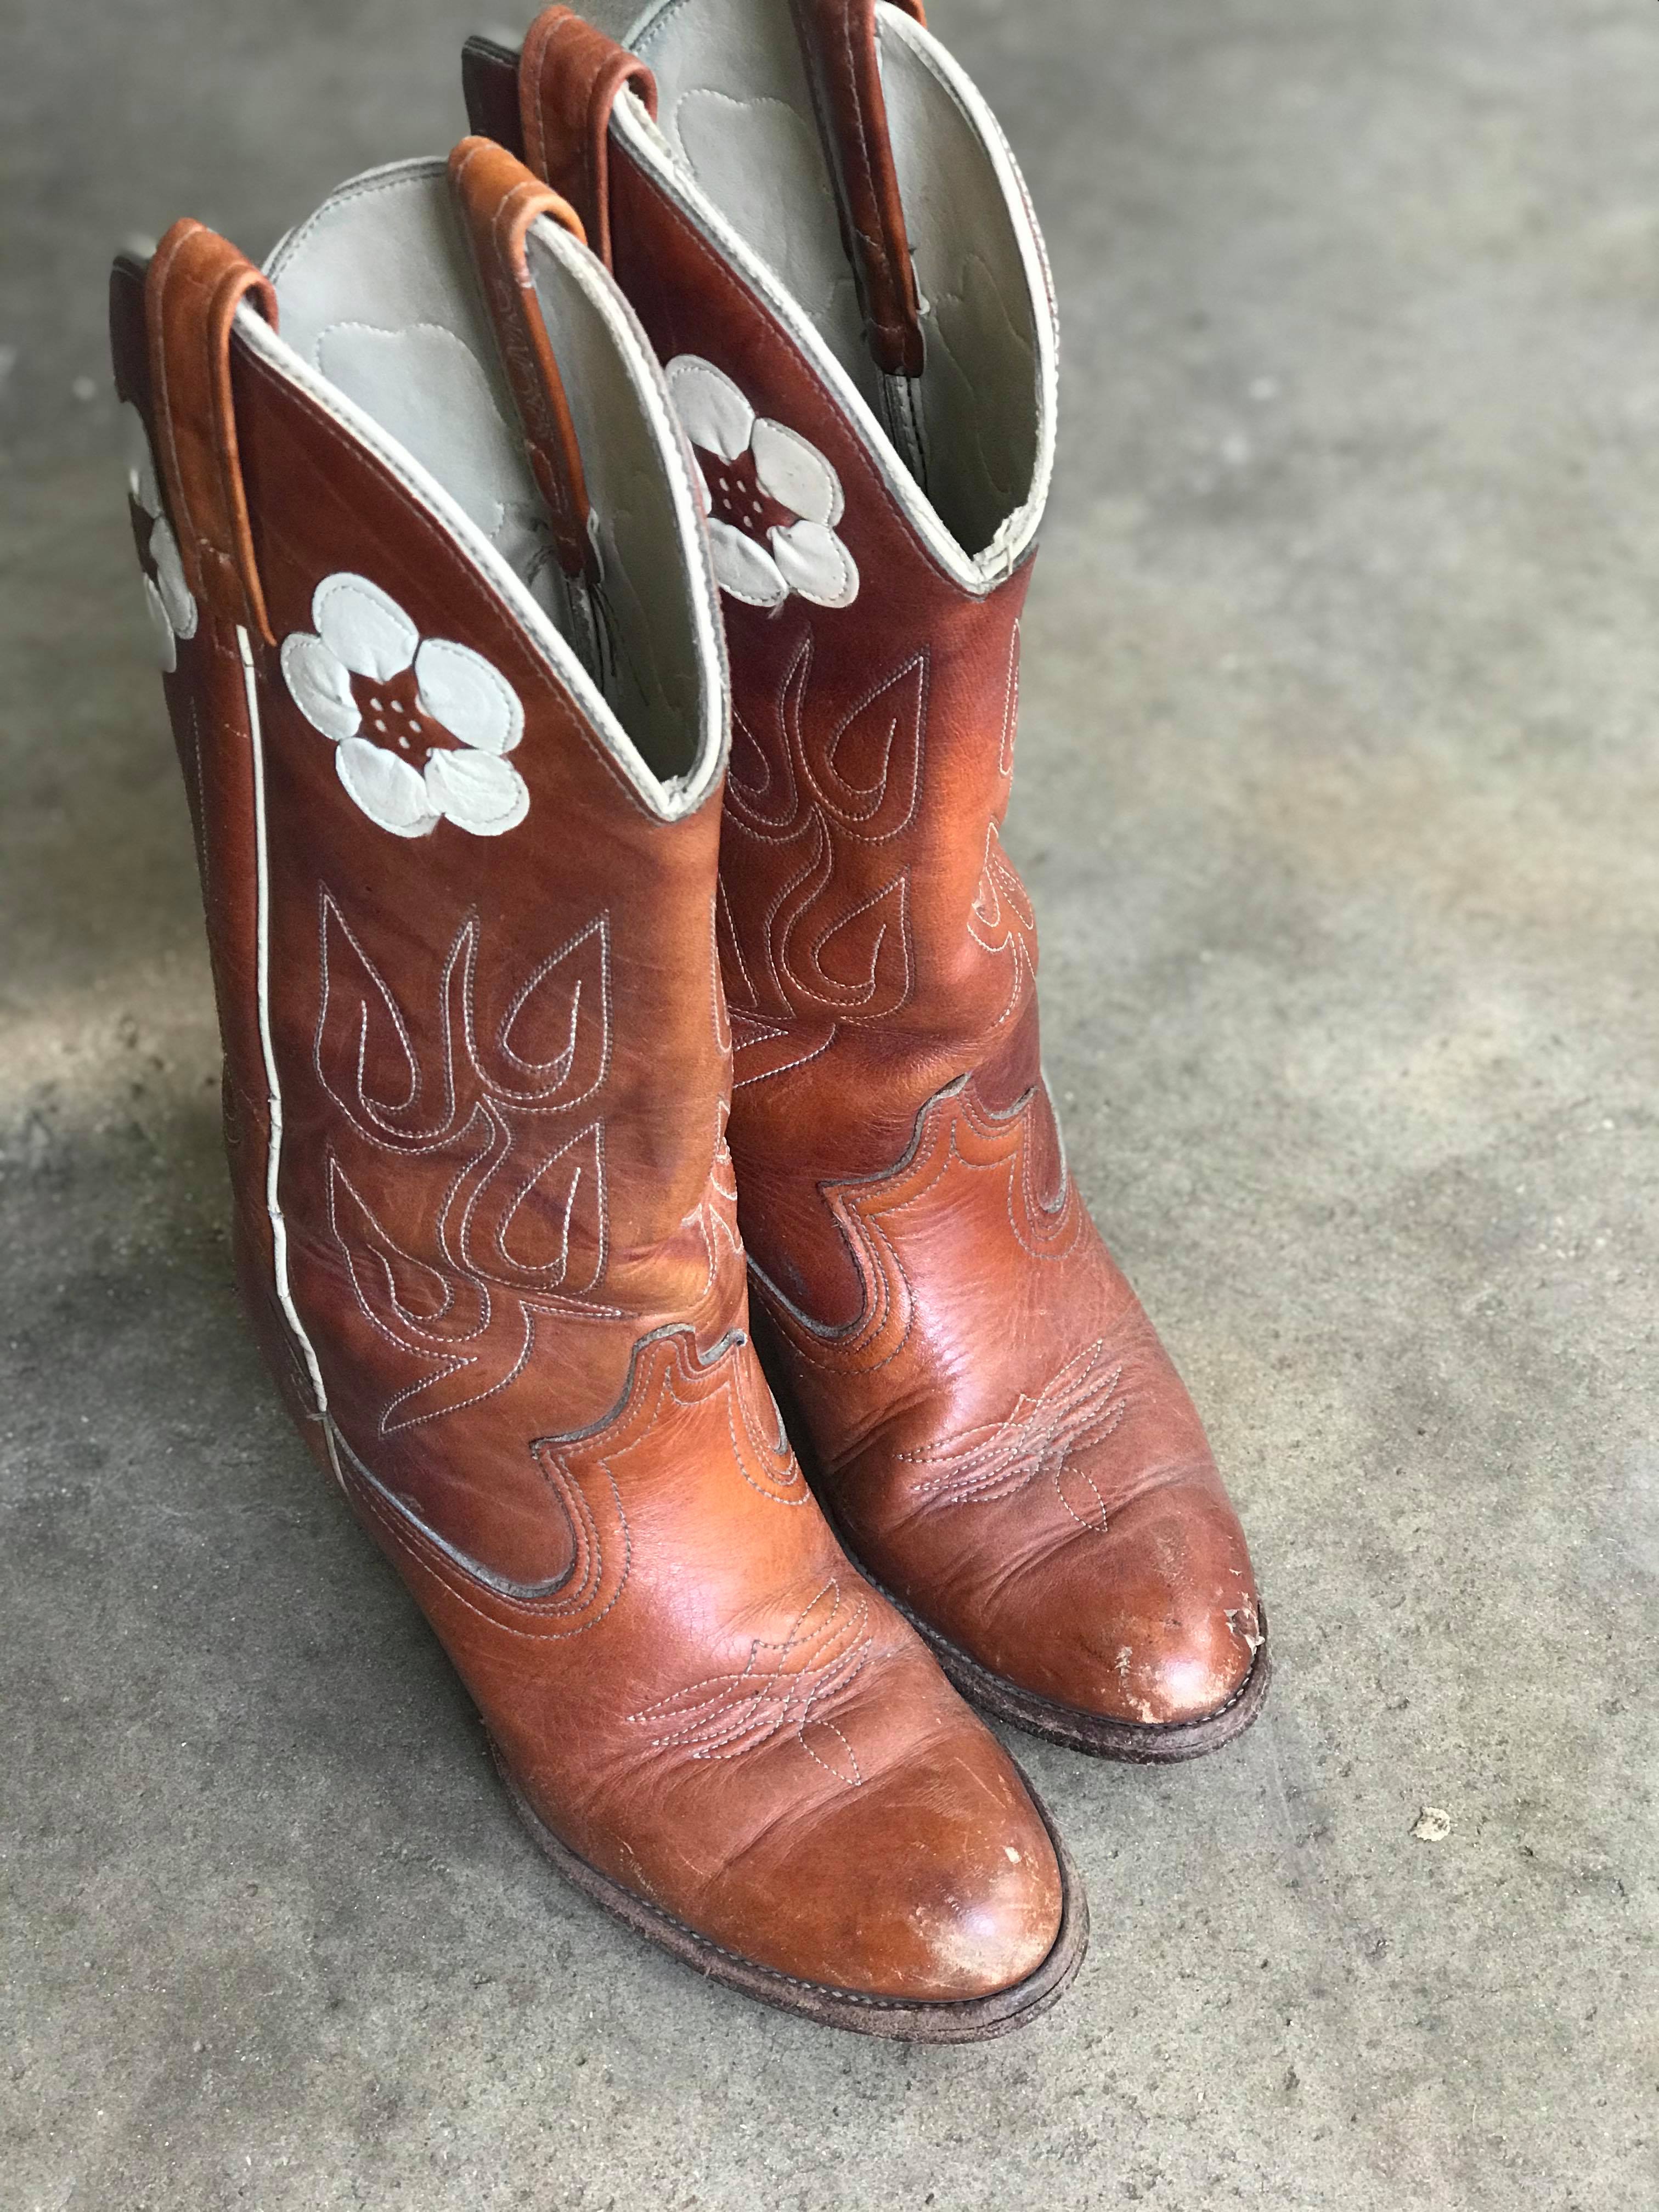 Vintage Acme Boots with Floral Design – PEOPLE OF THE VALLEY